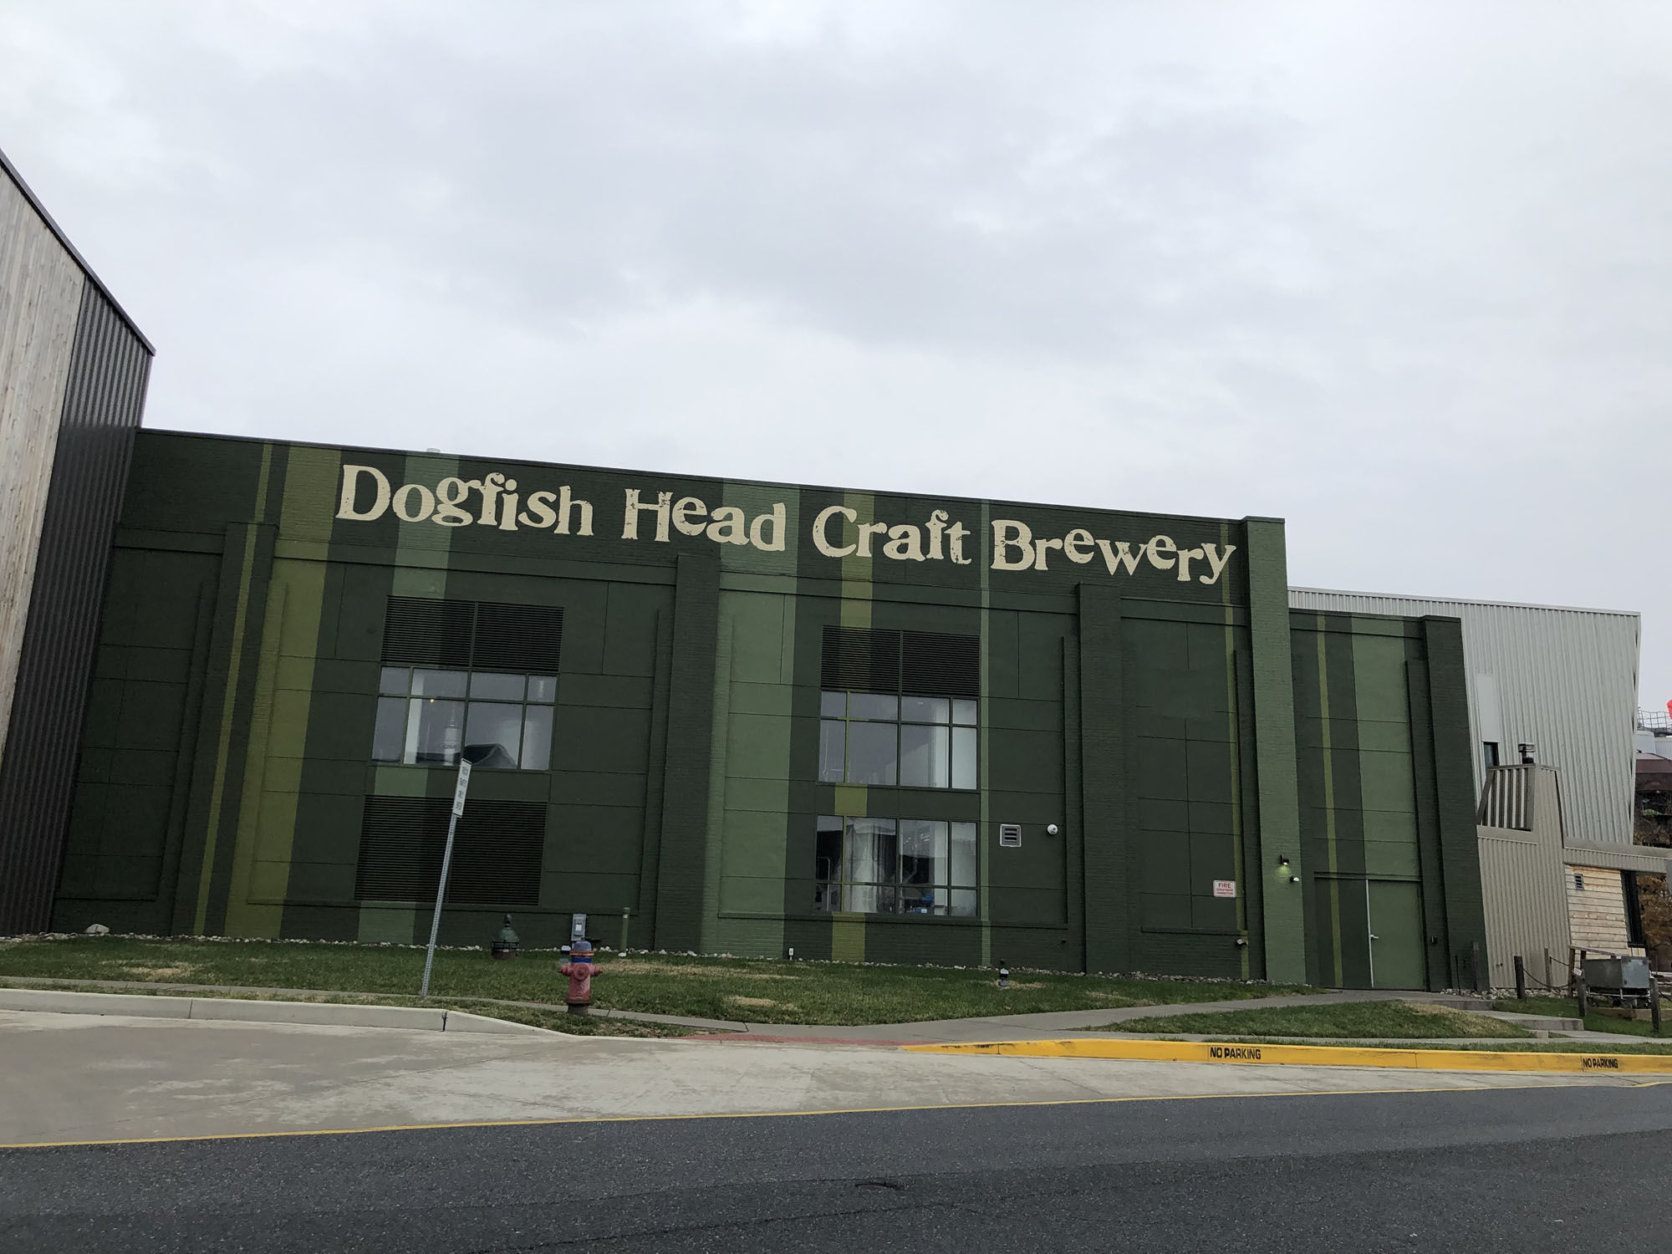 Dogfish Head, now based in Milton, Delaware, just outside of Rehoboth, defends the deal when asked about criticism that the definition of craft beer has become too broad. (WTOP/Mark Lewis)